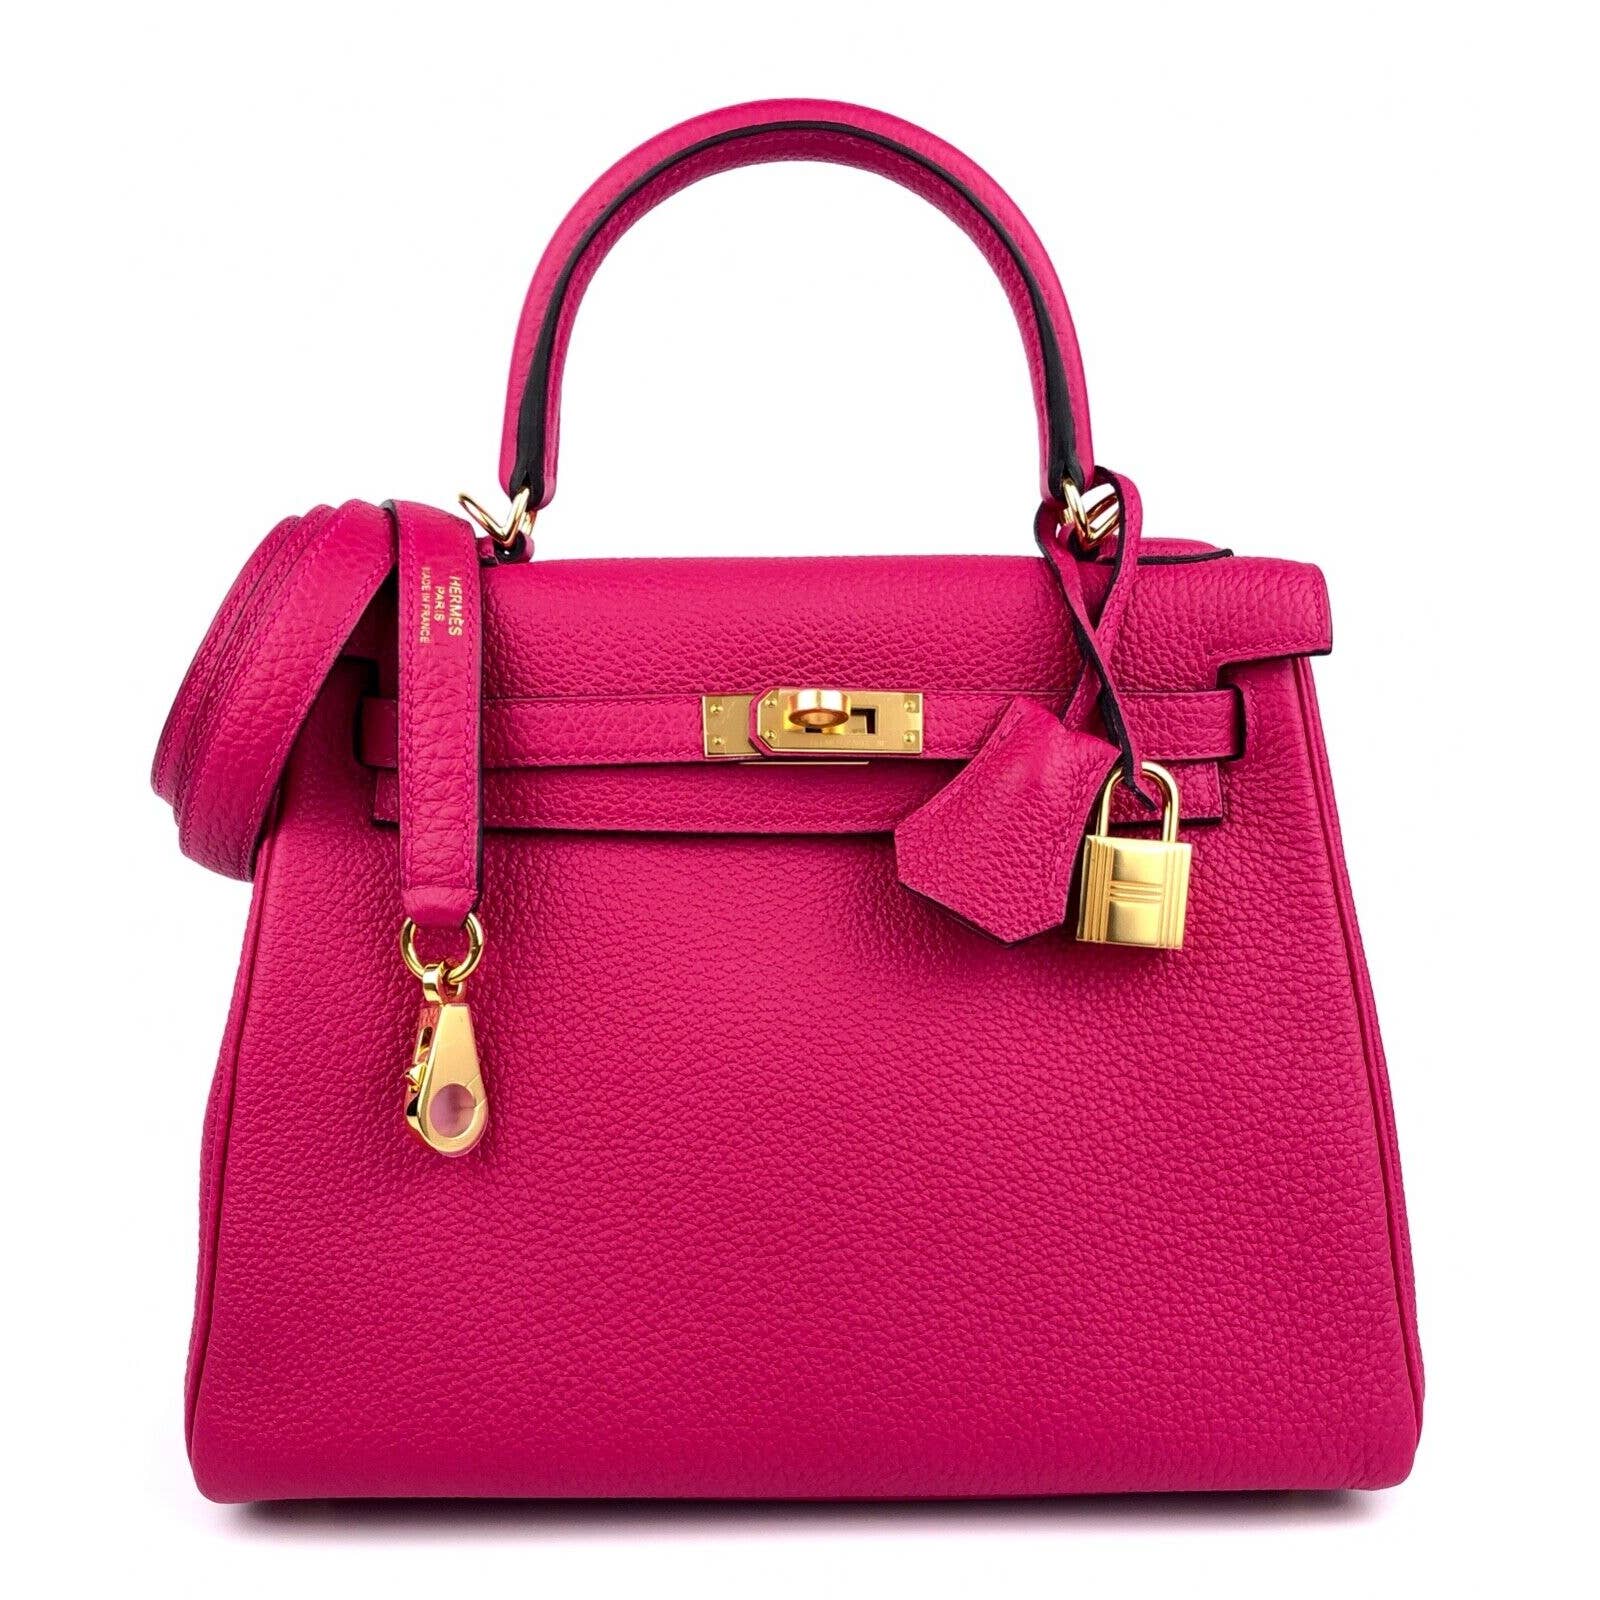 HERMES KELLY 25 FRAMBOISE PINK TOGO LEATHER GOLD HARDWARE 2020 – Lux Addicts